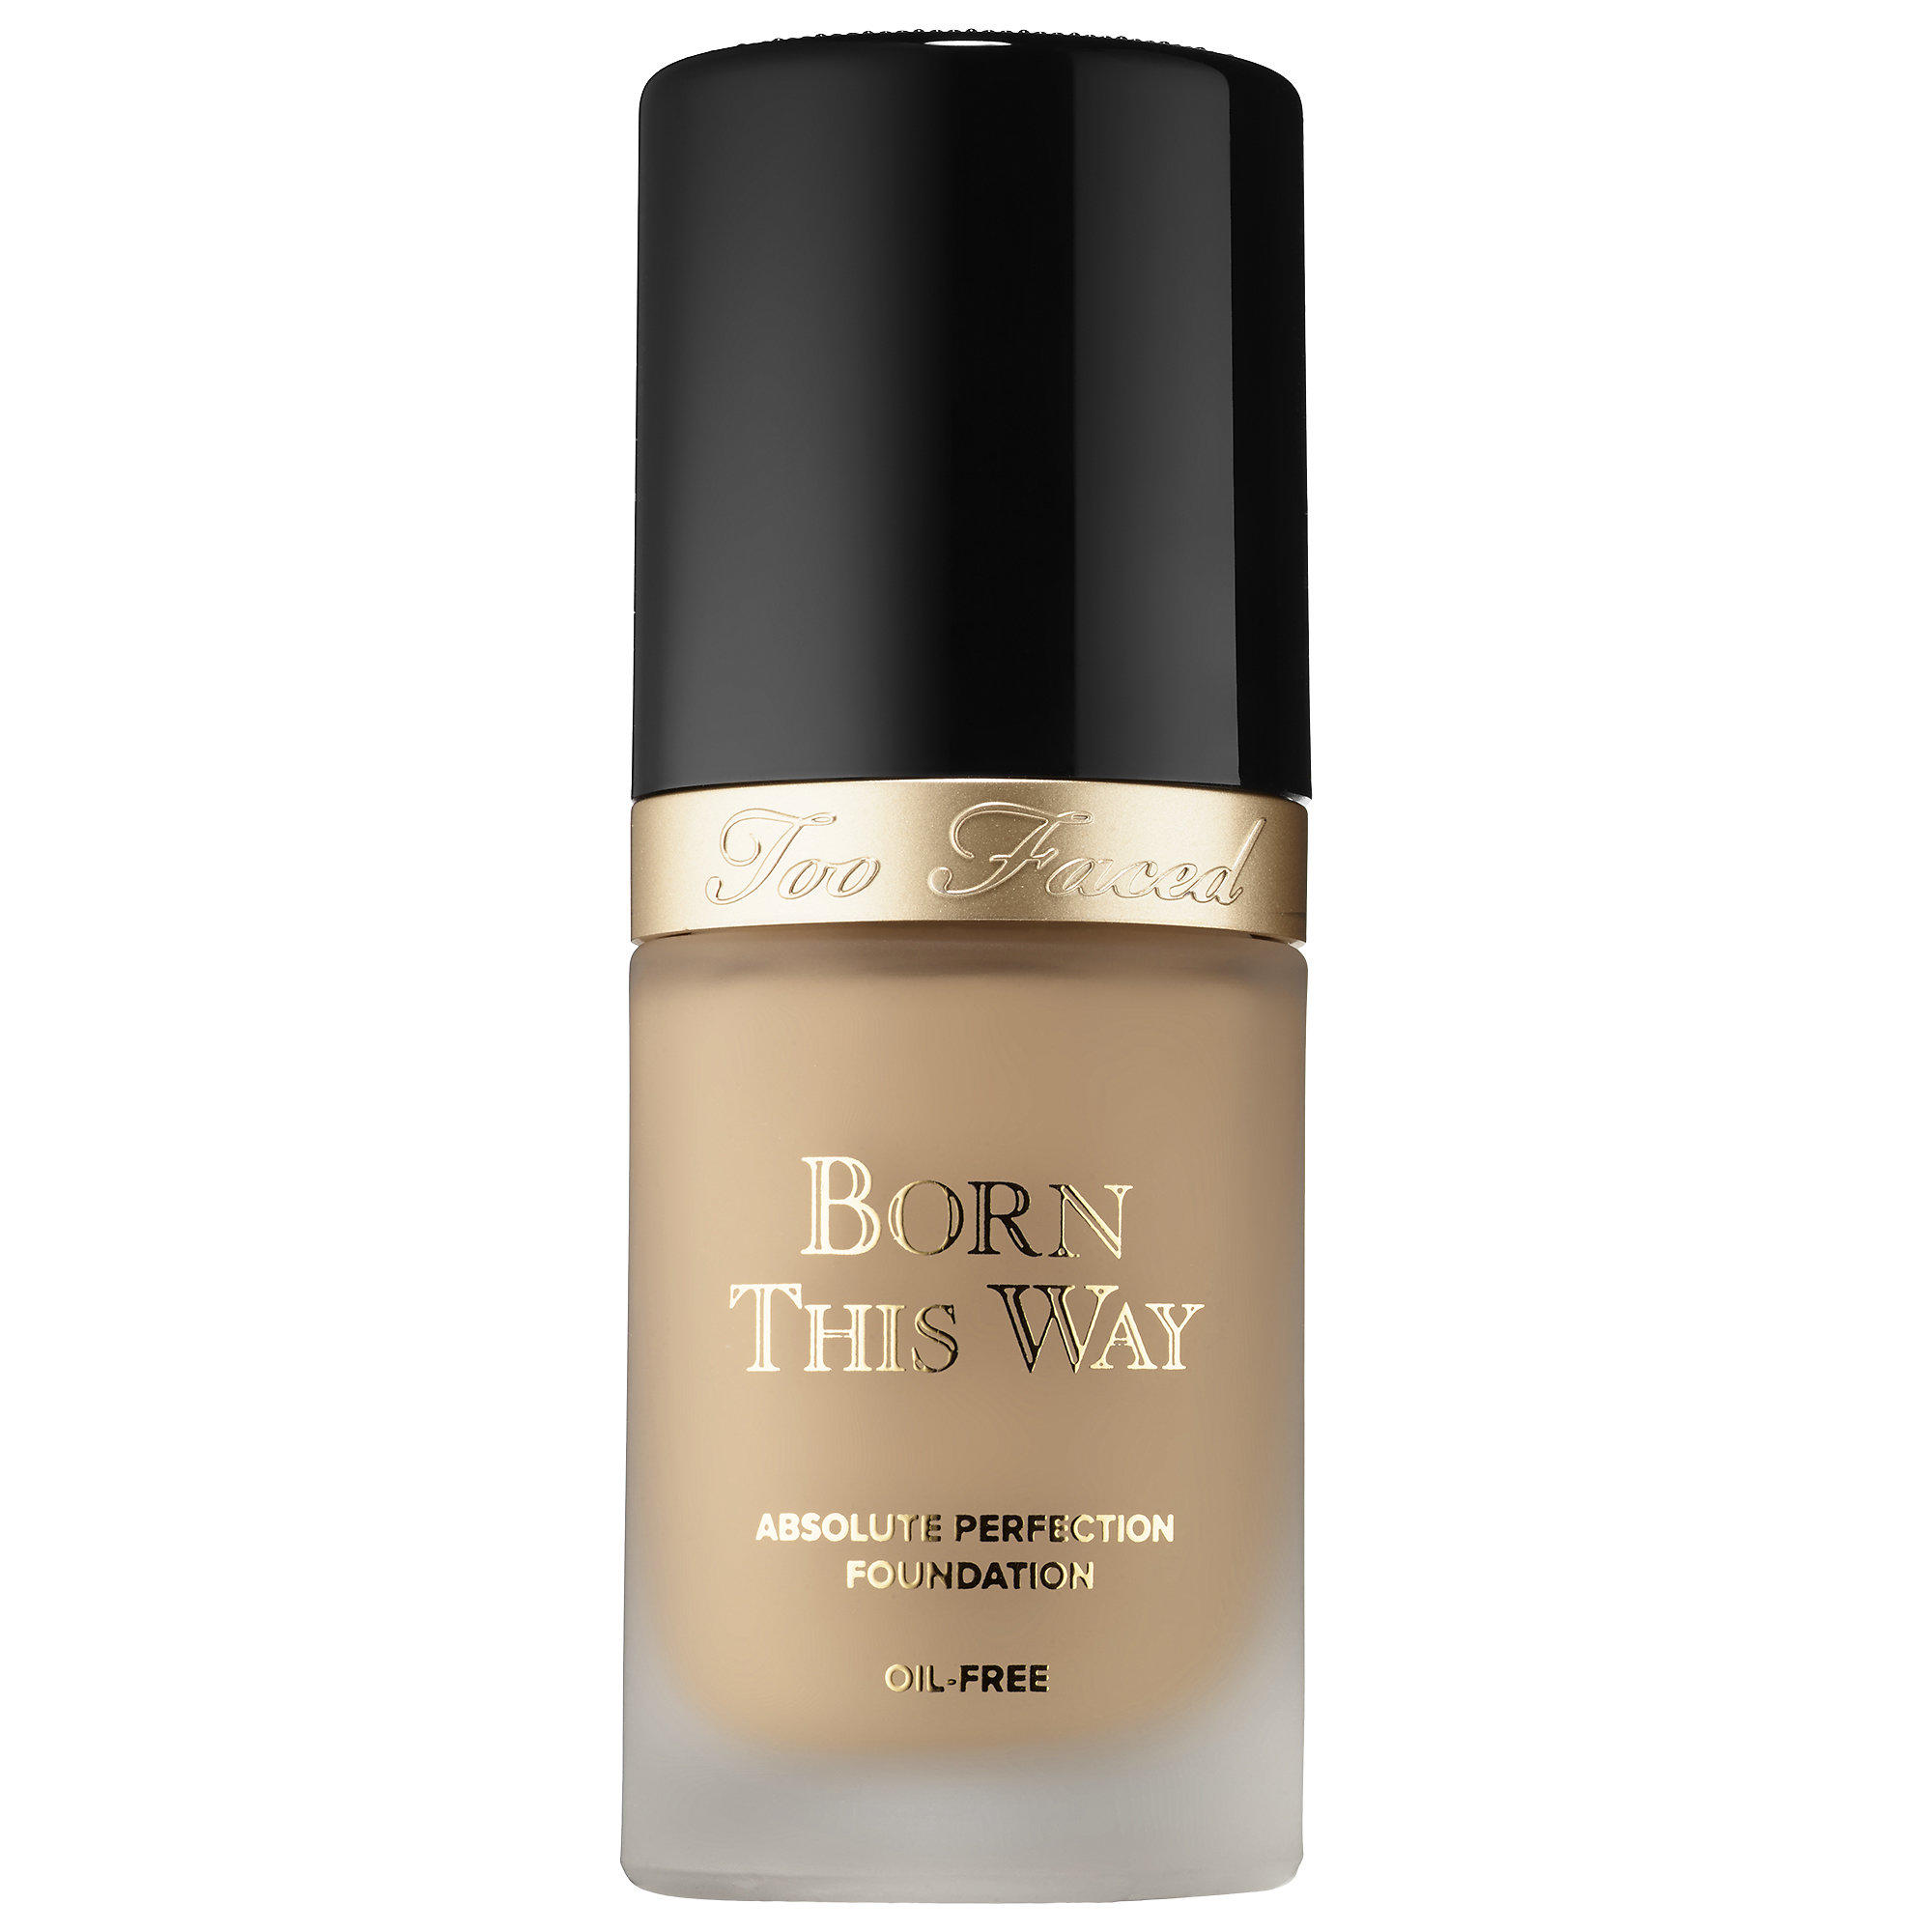 Too Faced Born This Way Foundation Sand